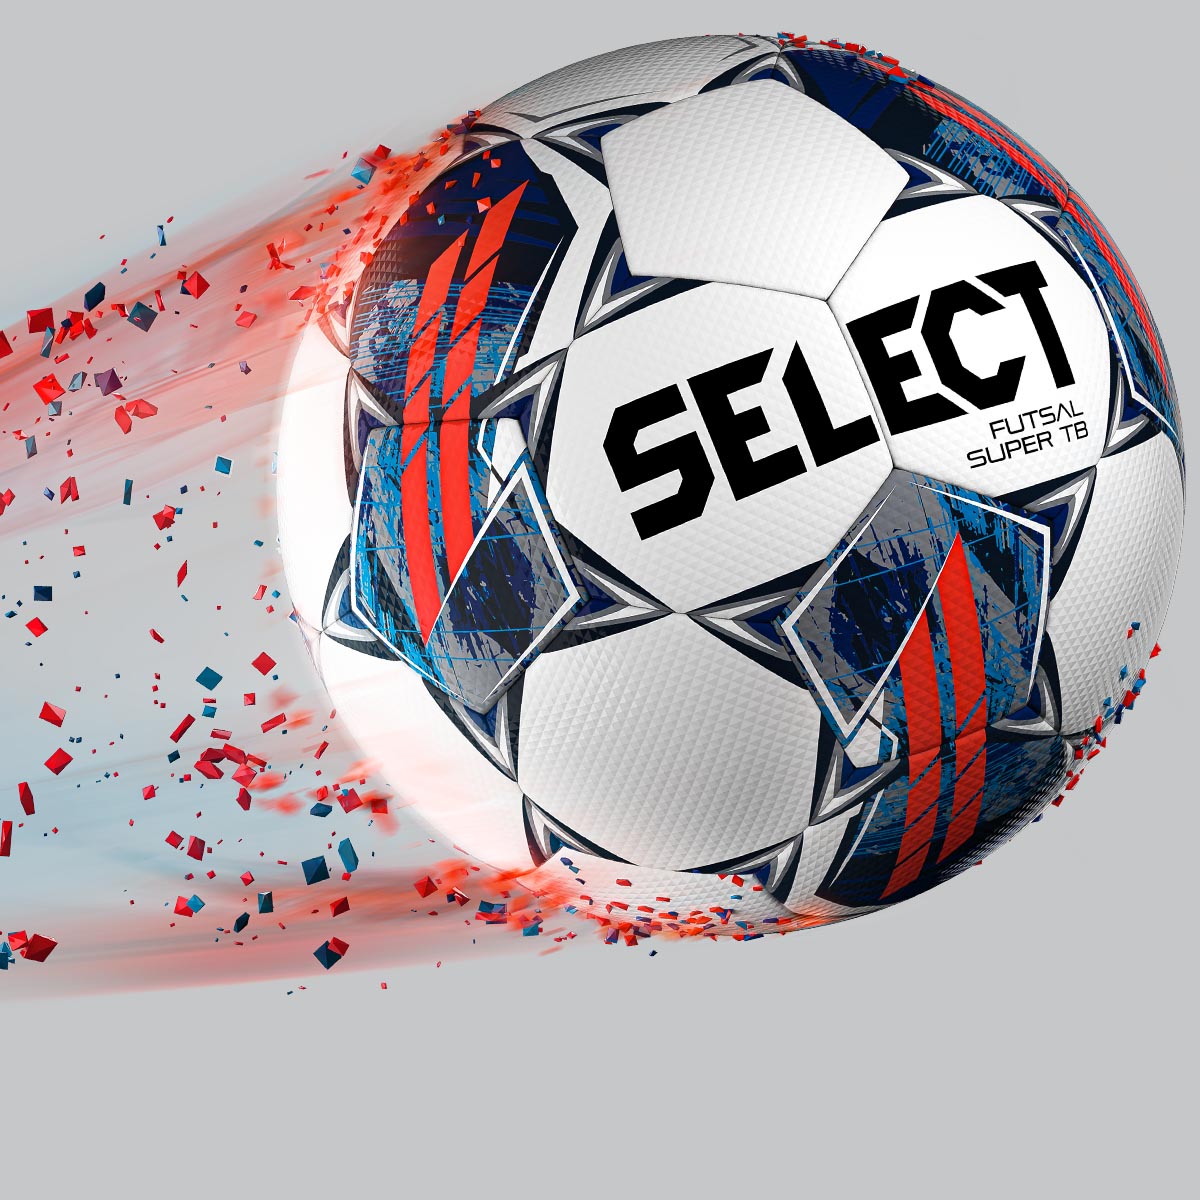 Find high quality balls here – SELECT